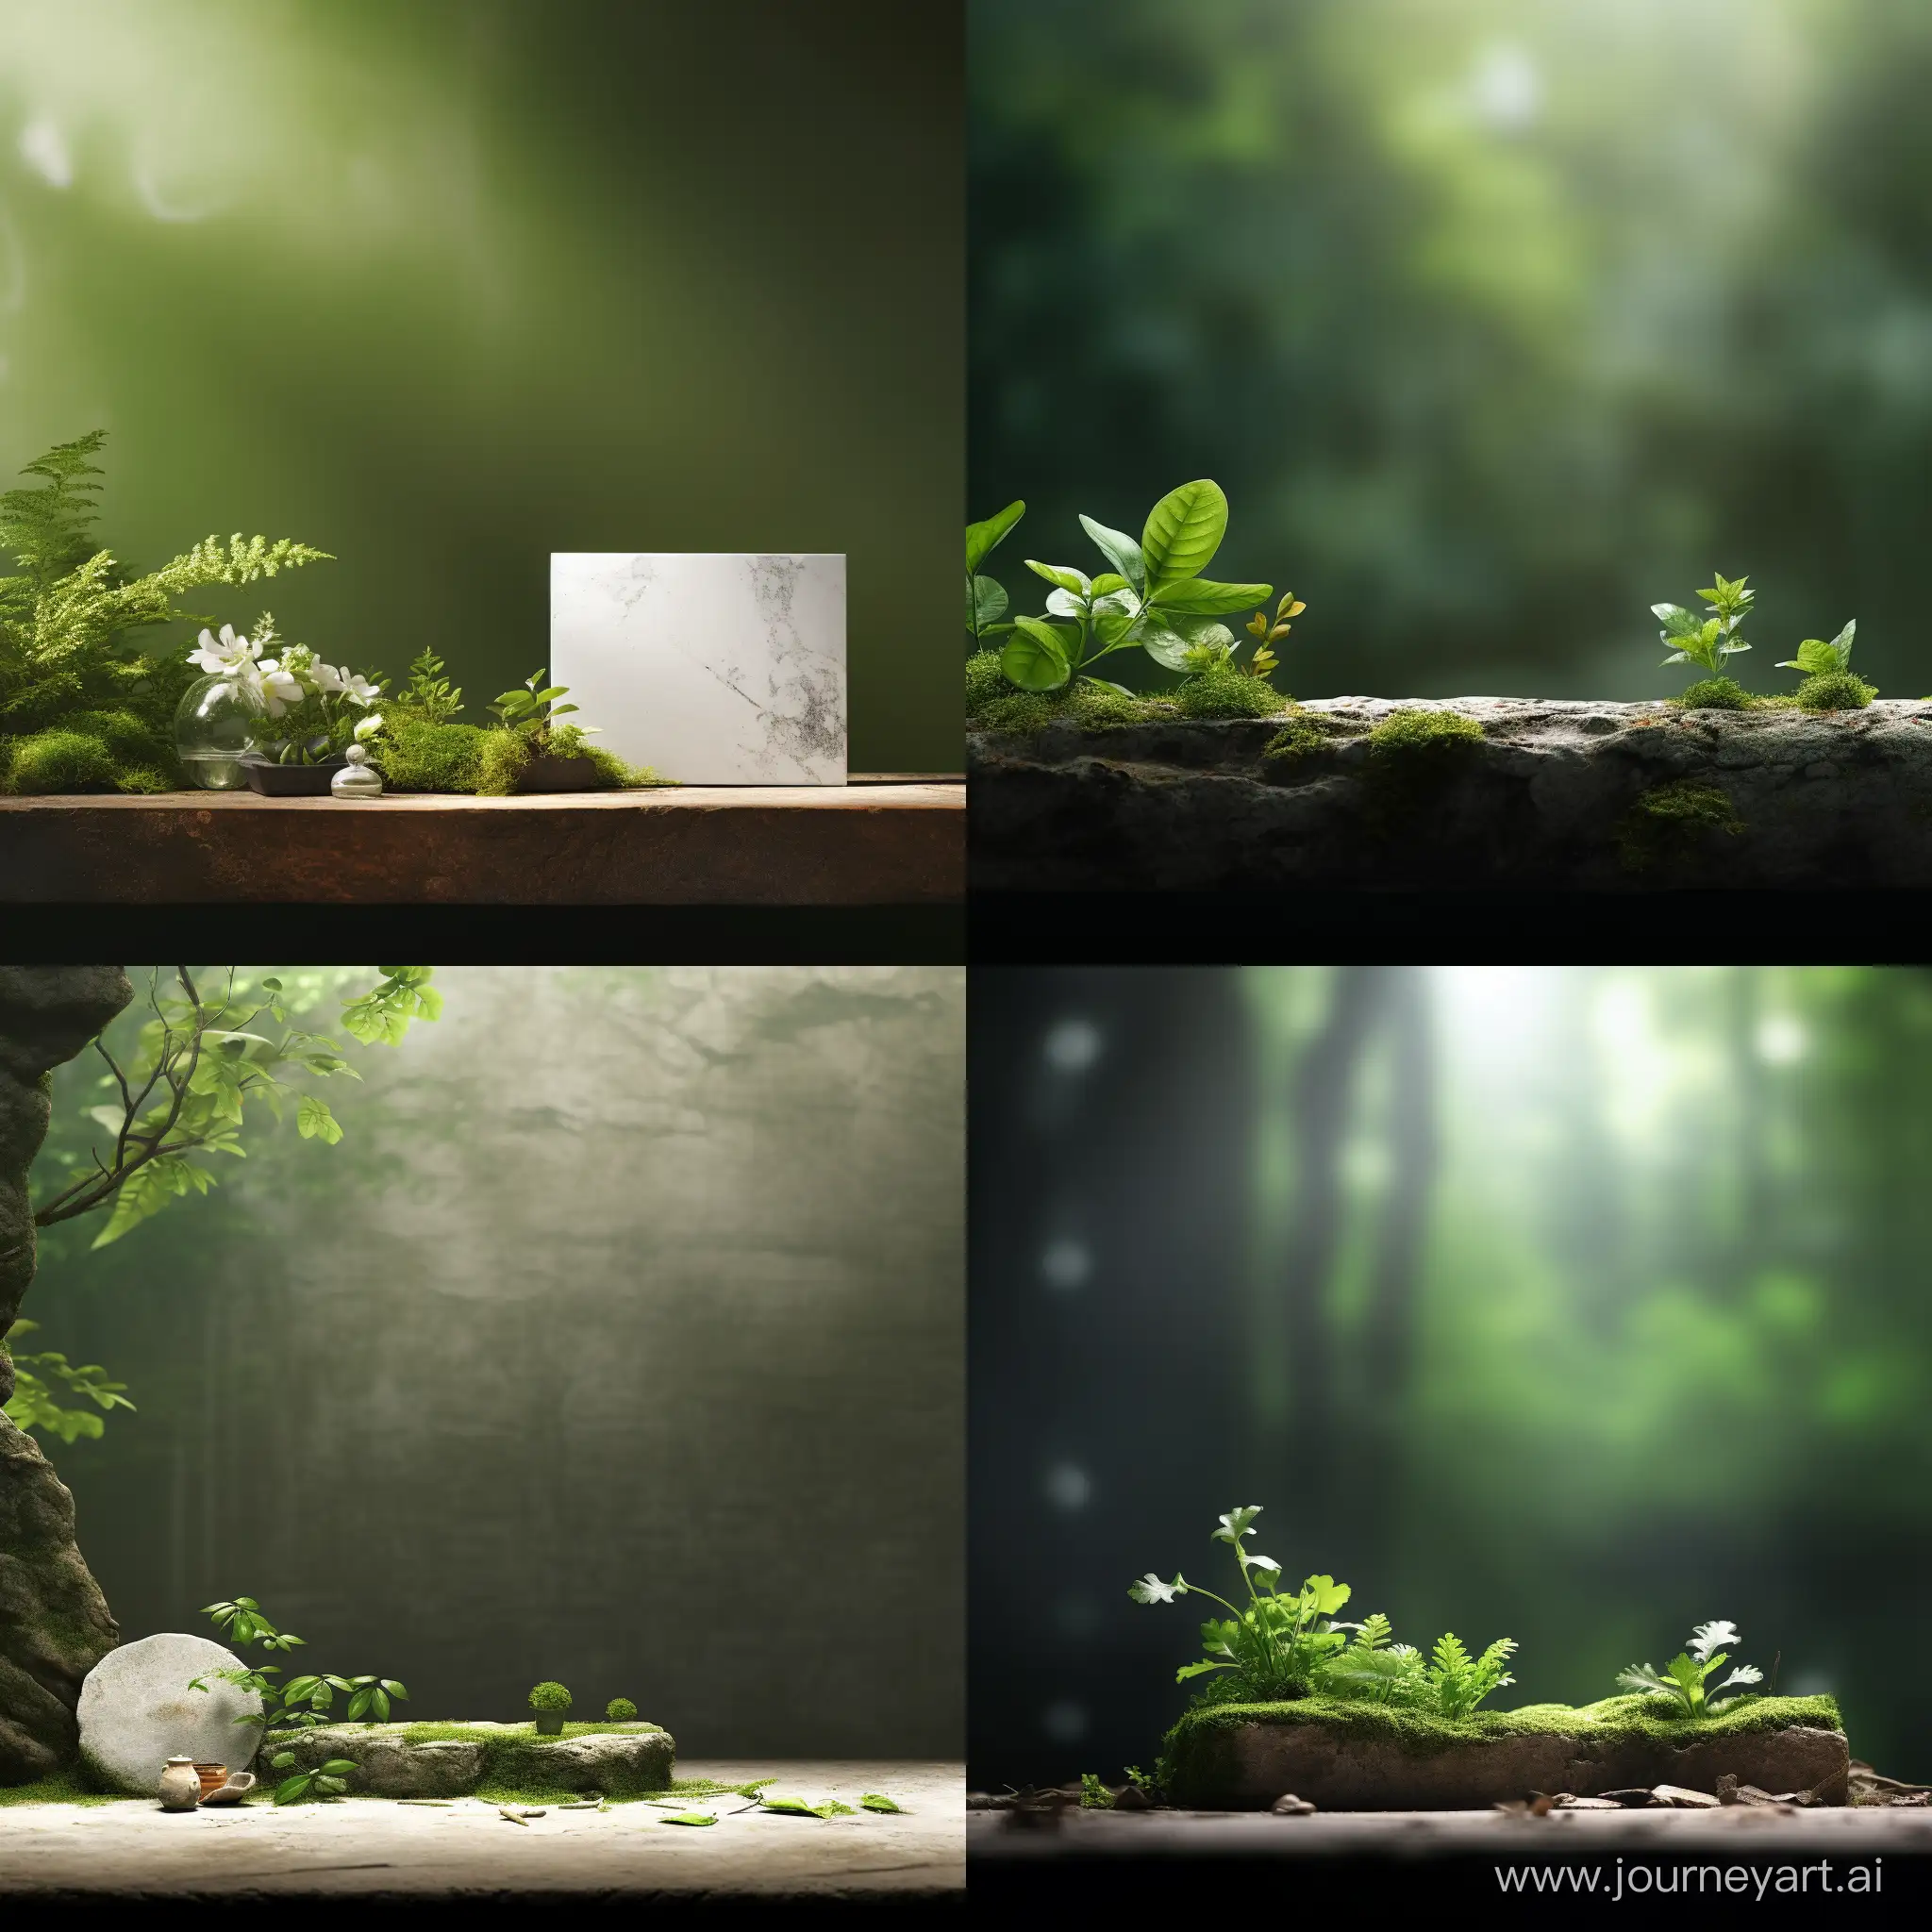 clean,realistic,no humans,ground,brick,leaf,white flowers,still life,moss,shadow,simple background,green theme,Gradient background,clean)),(Simple background),ultra realistic 8k cg,flawless,clean,masterpiece,professional artwork,famous artwork,cinematic lighting,